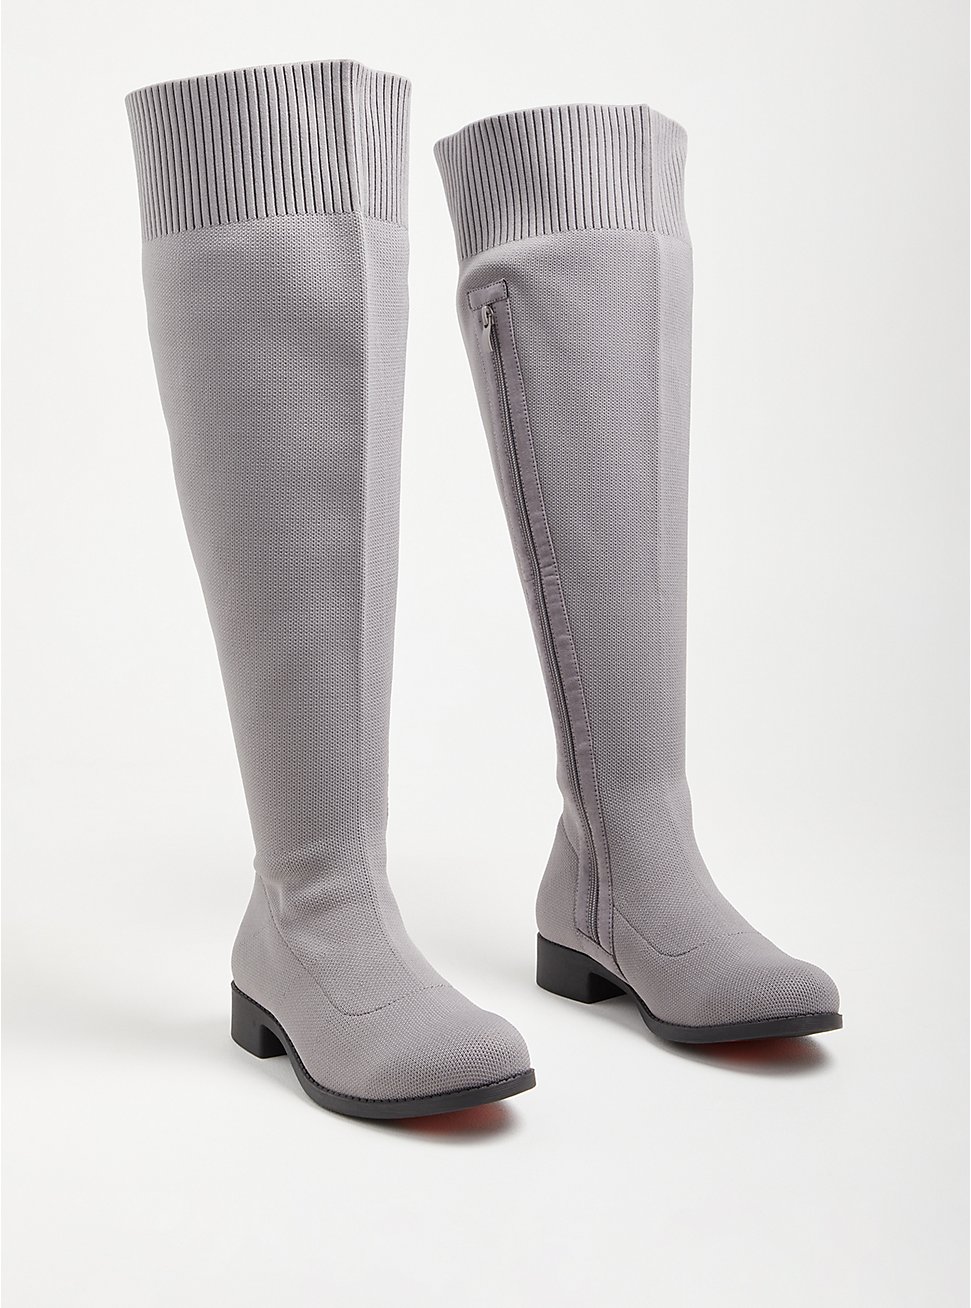 Stretch Knit Over The Knee Boot - Grey (WW), BURGUNDY, hi-res